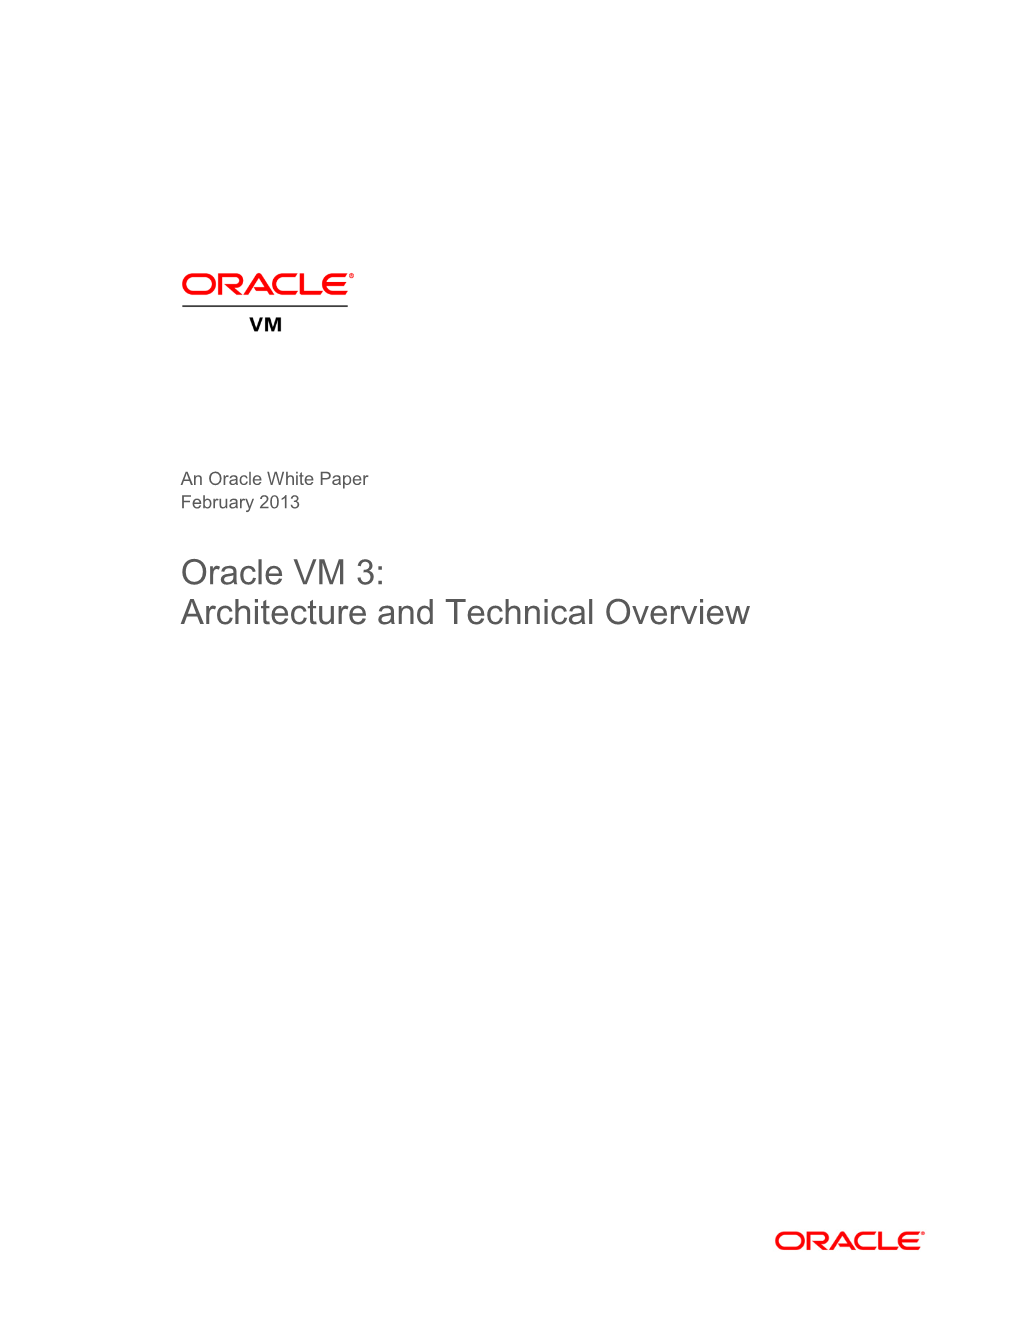 Oracle VM 3: Architecture and Technical Overview